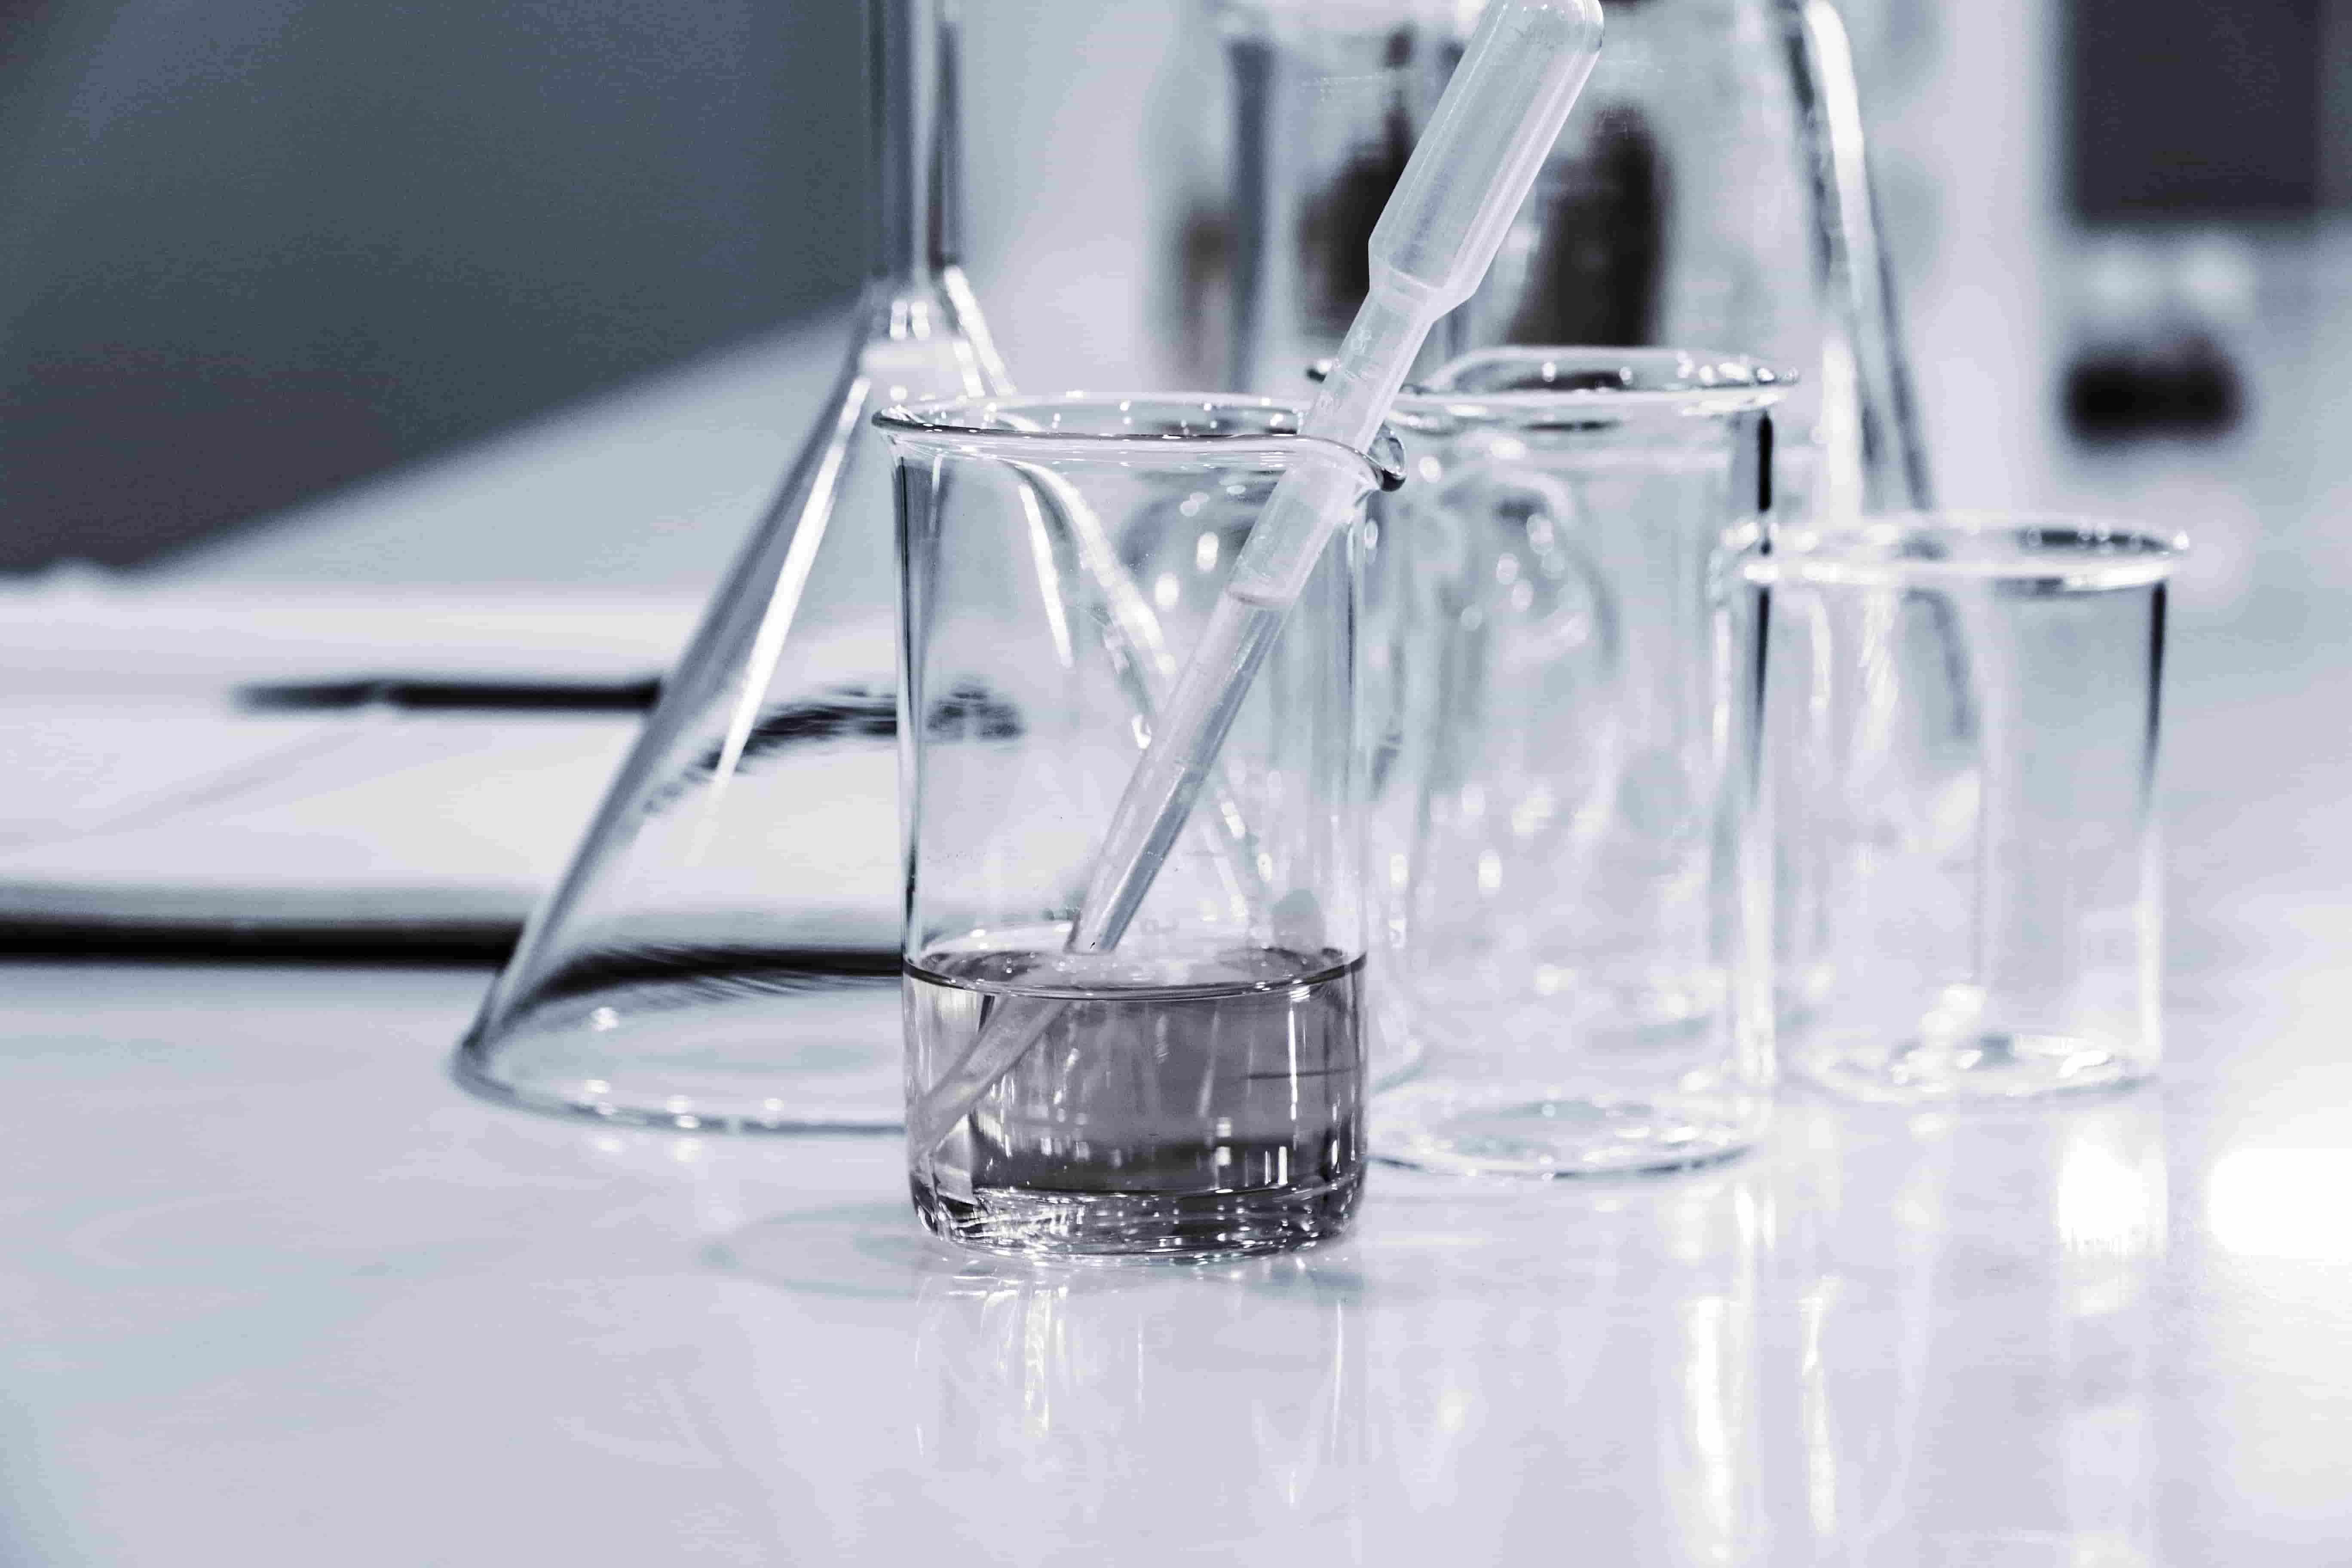 Clear beakers in a lab